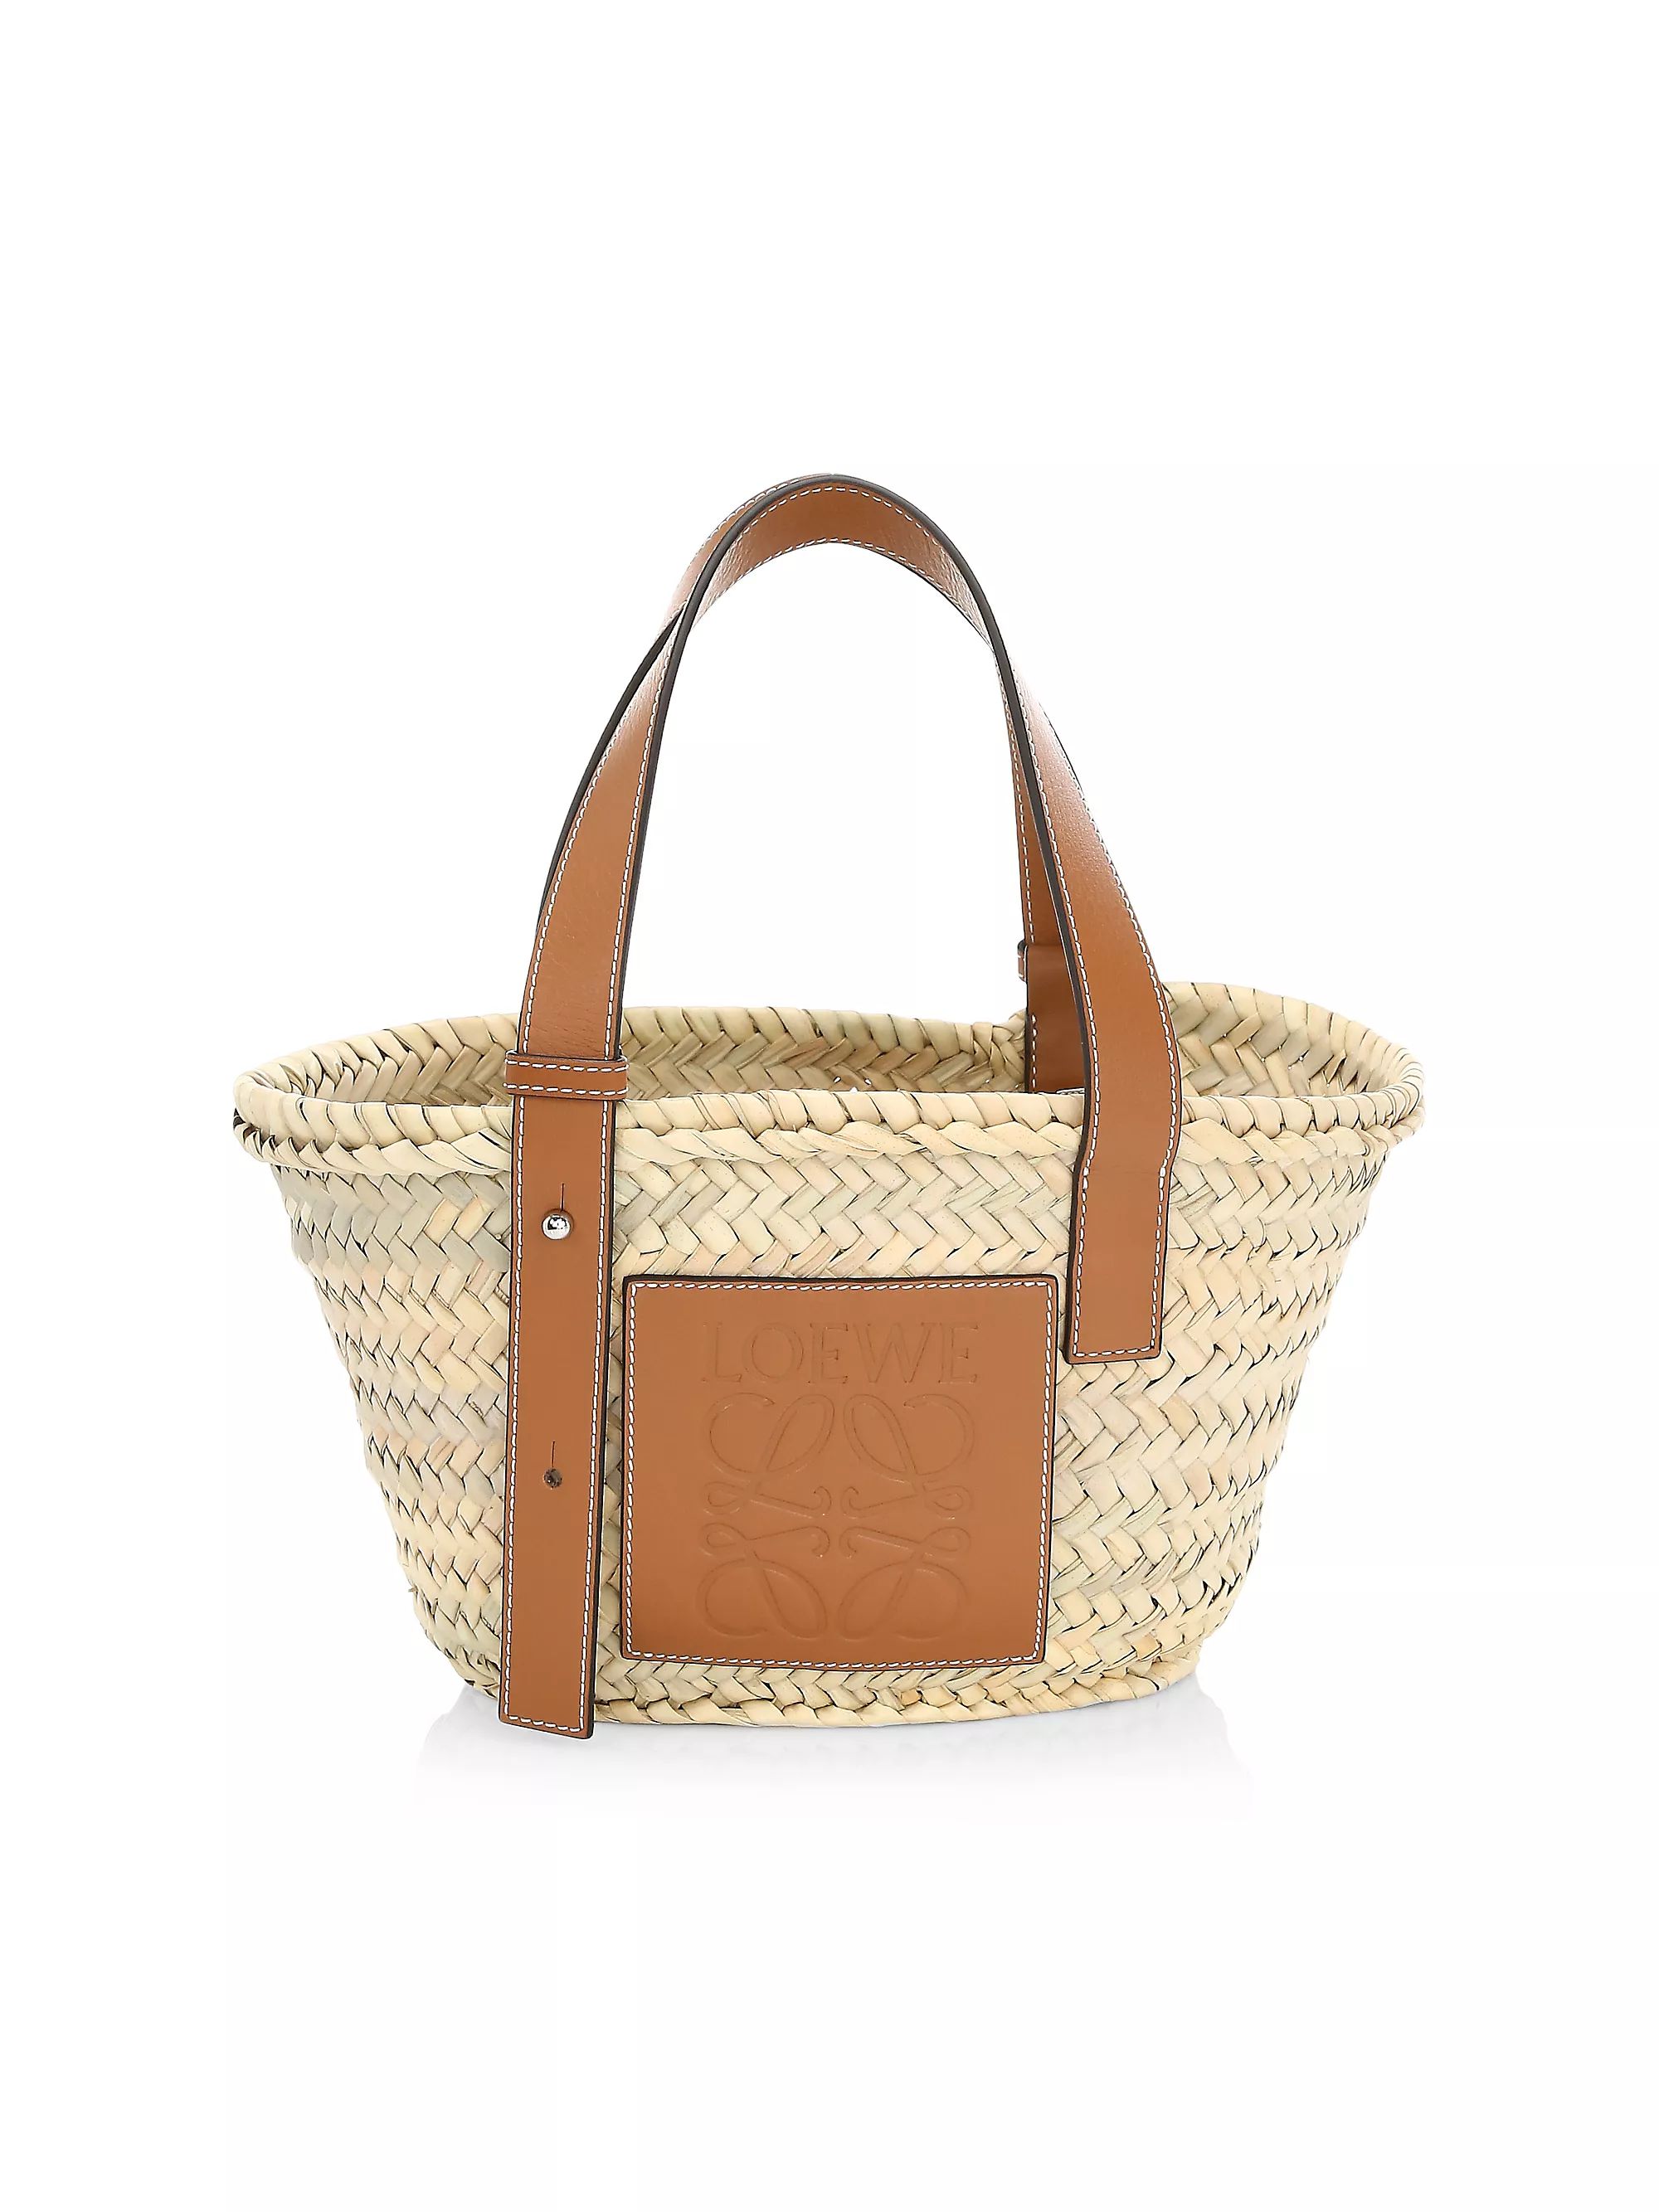 Shop By CategoryTotesLOEWESmall Leather-Trimmed Woven Basket BagRating: 2.5 out of 5 stars2$590 | Saks Fifth Avenue